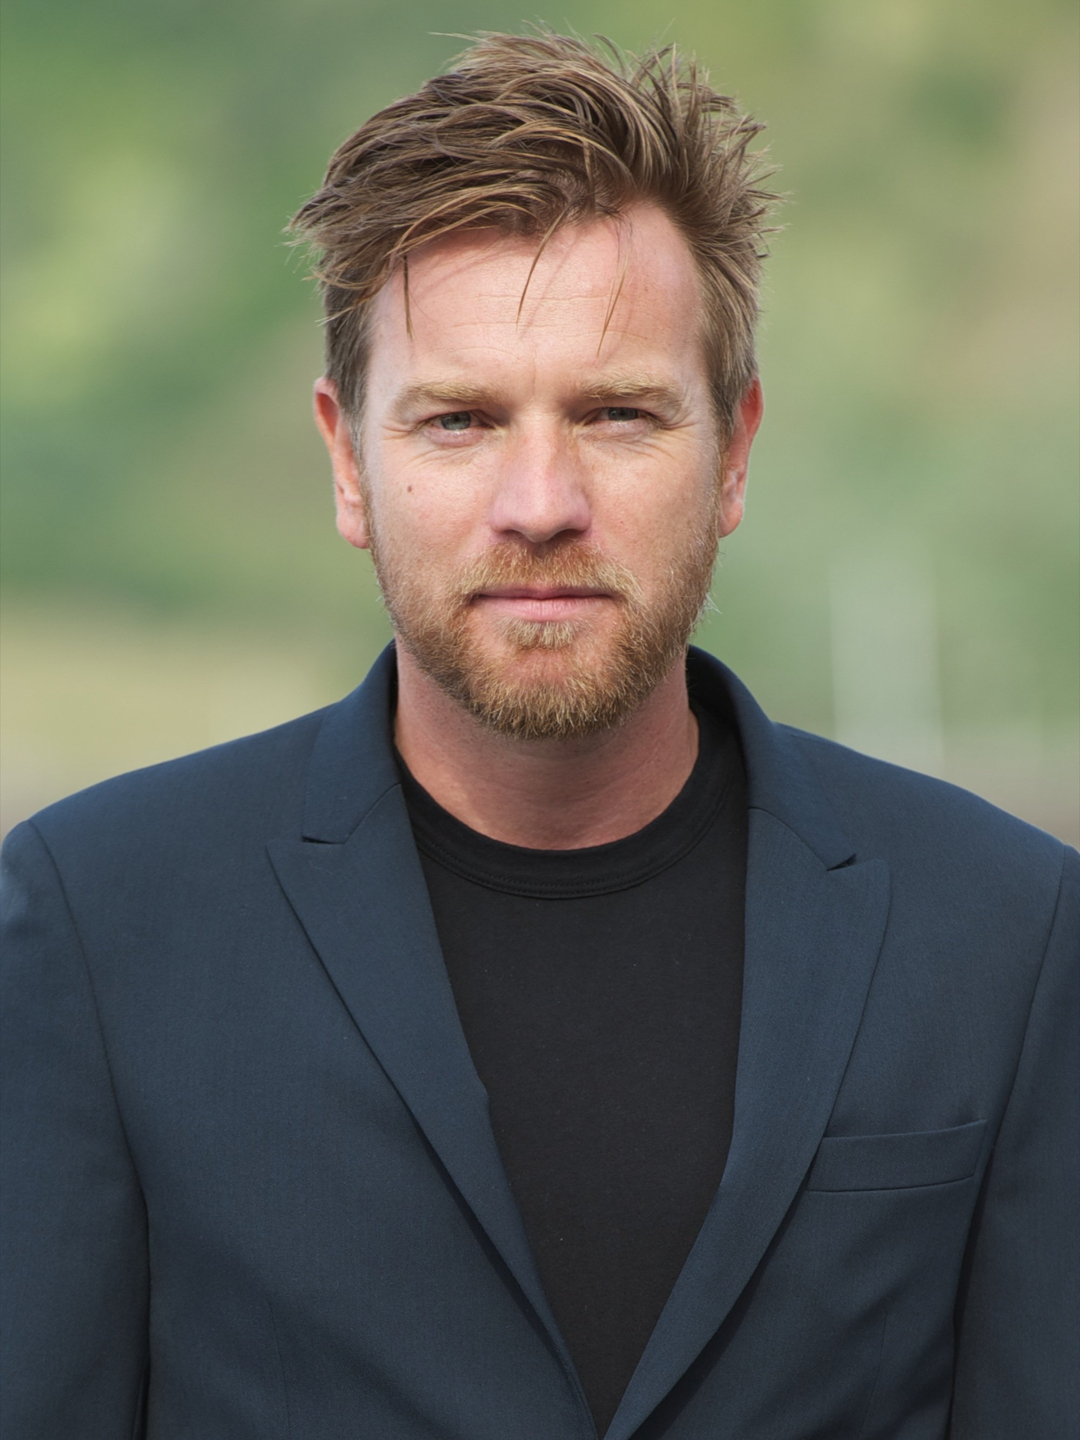 Ewan McGregor who is his father